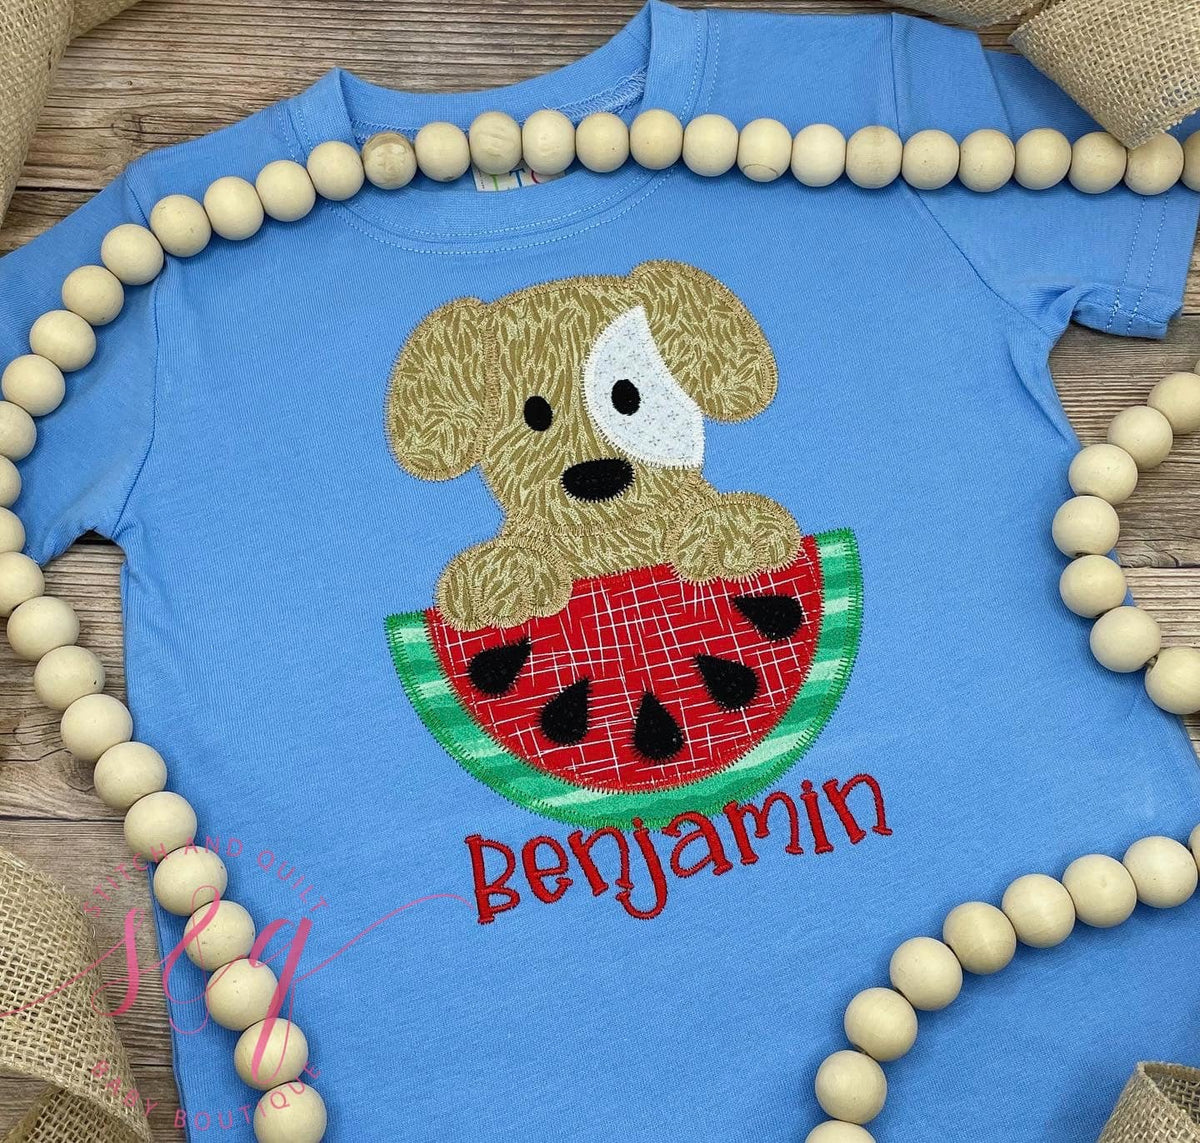 Stay Cool this Summer with our Short-Sleeved Puppy &amp; Watermelon Shirt for Boys